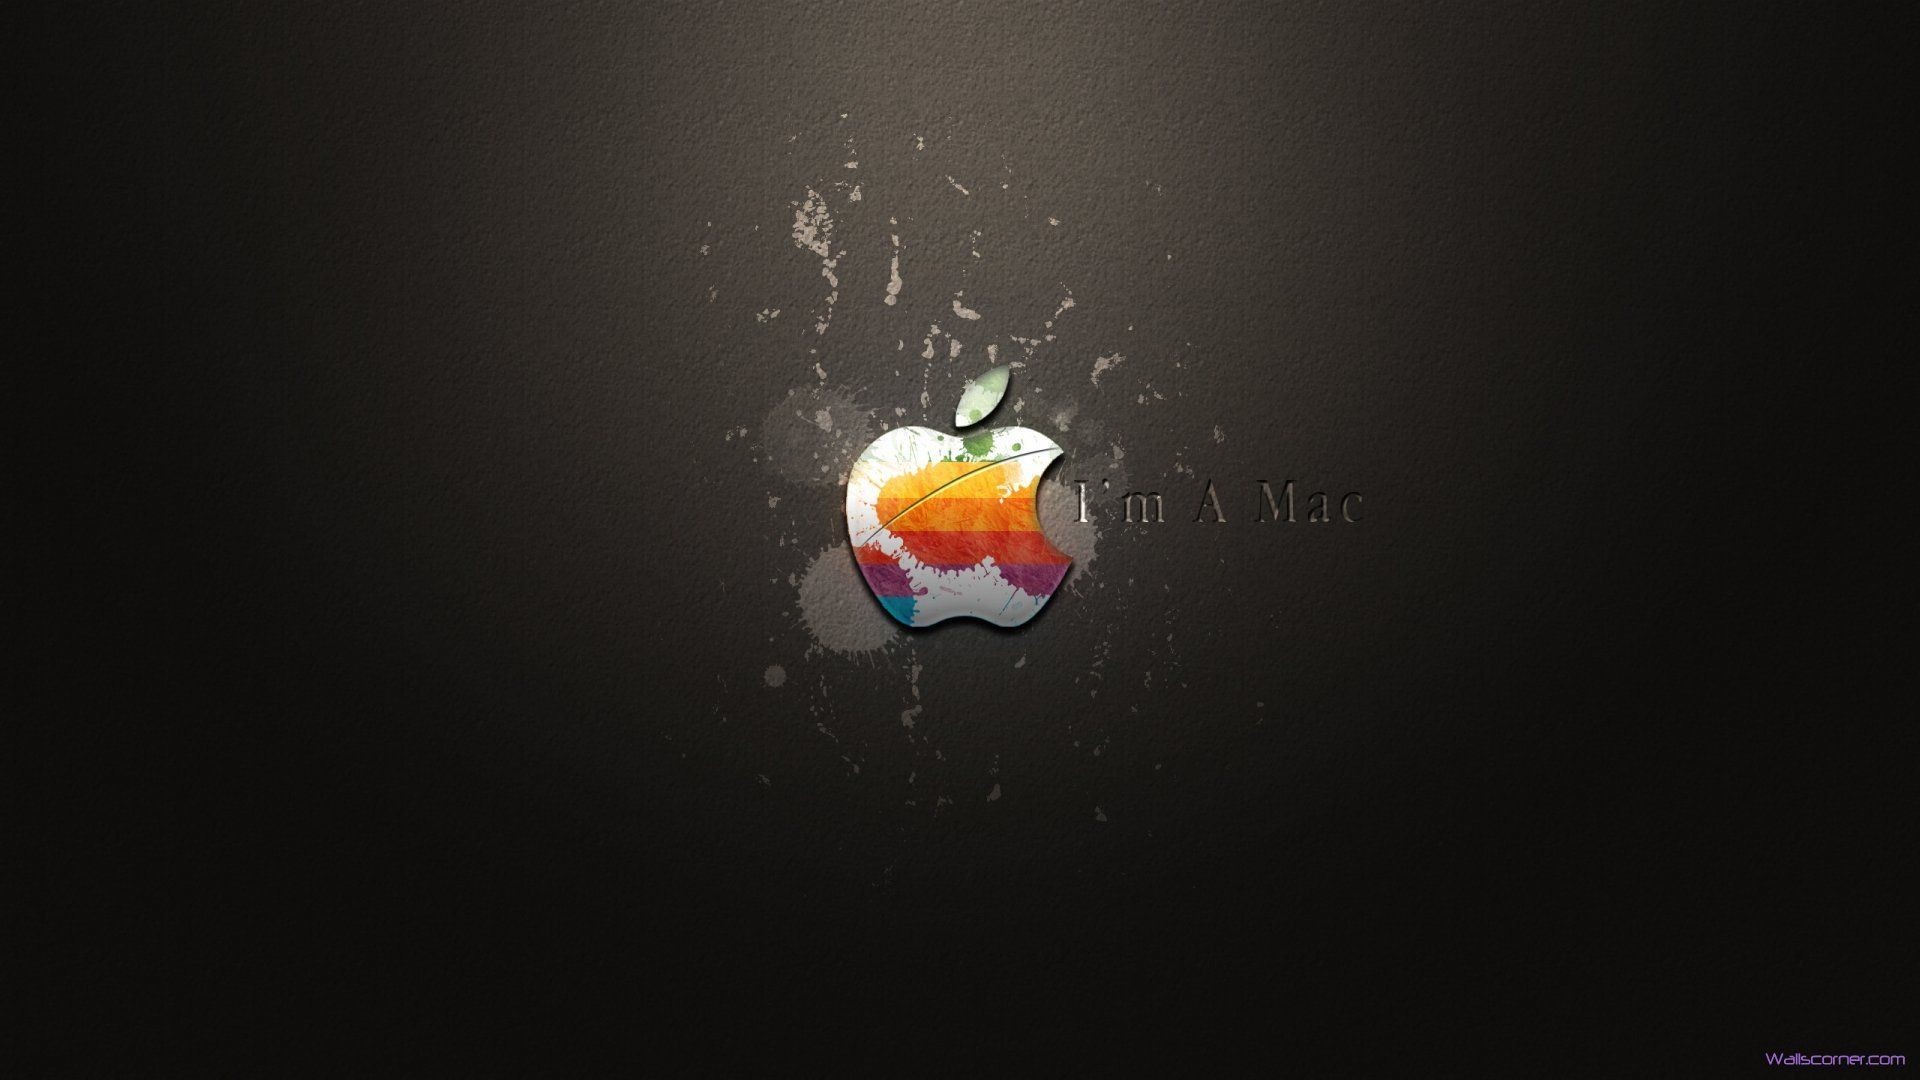 Wallpapers For > Apple Wallpaper Hd 1080p Download - Shivaji Raje Wallpaper Full Hd - HD Wallpaper 